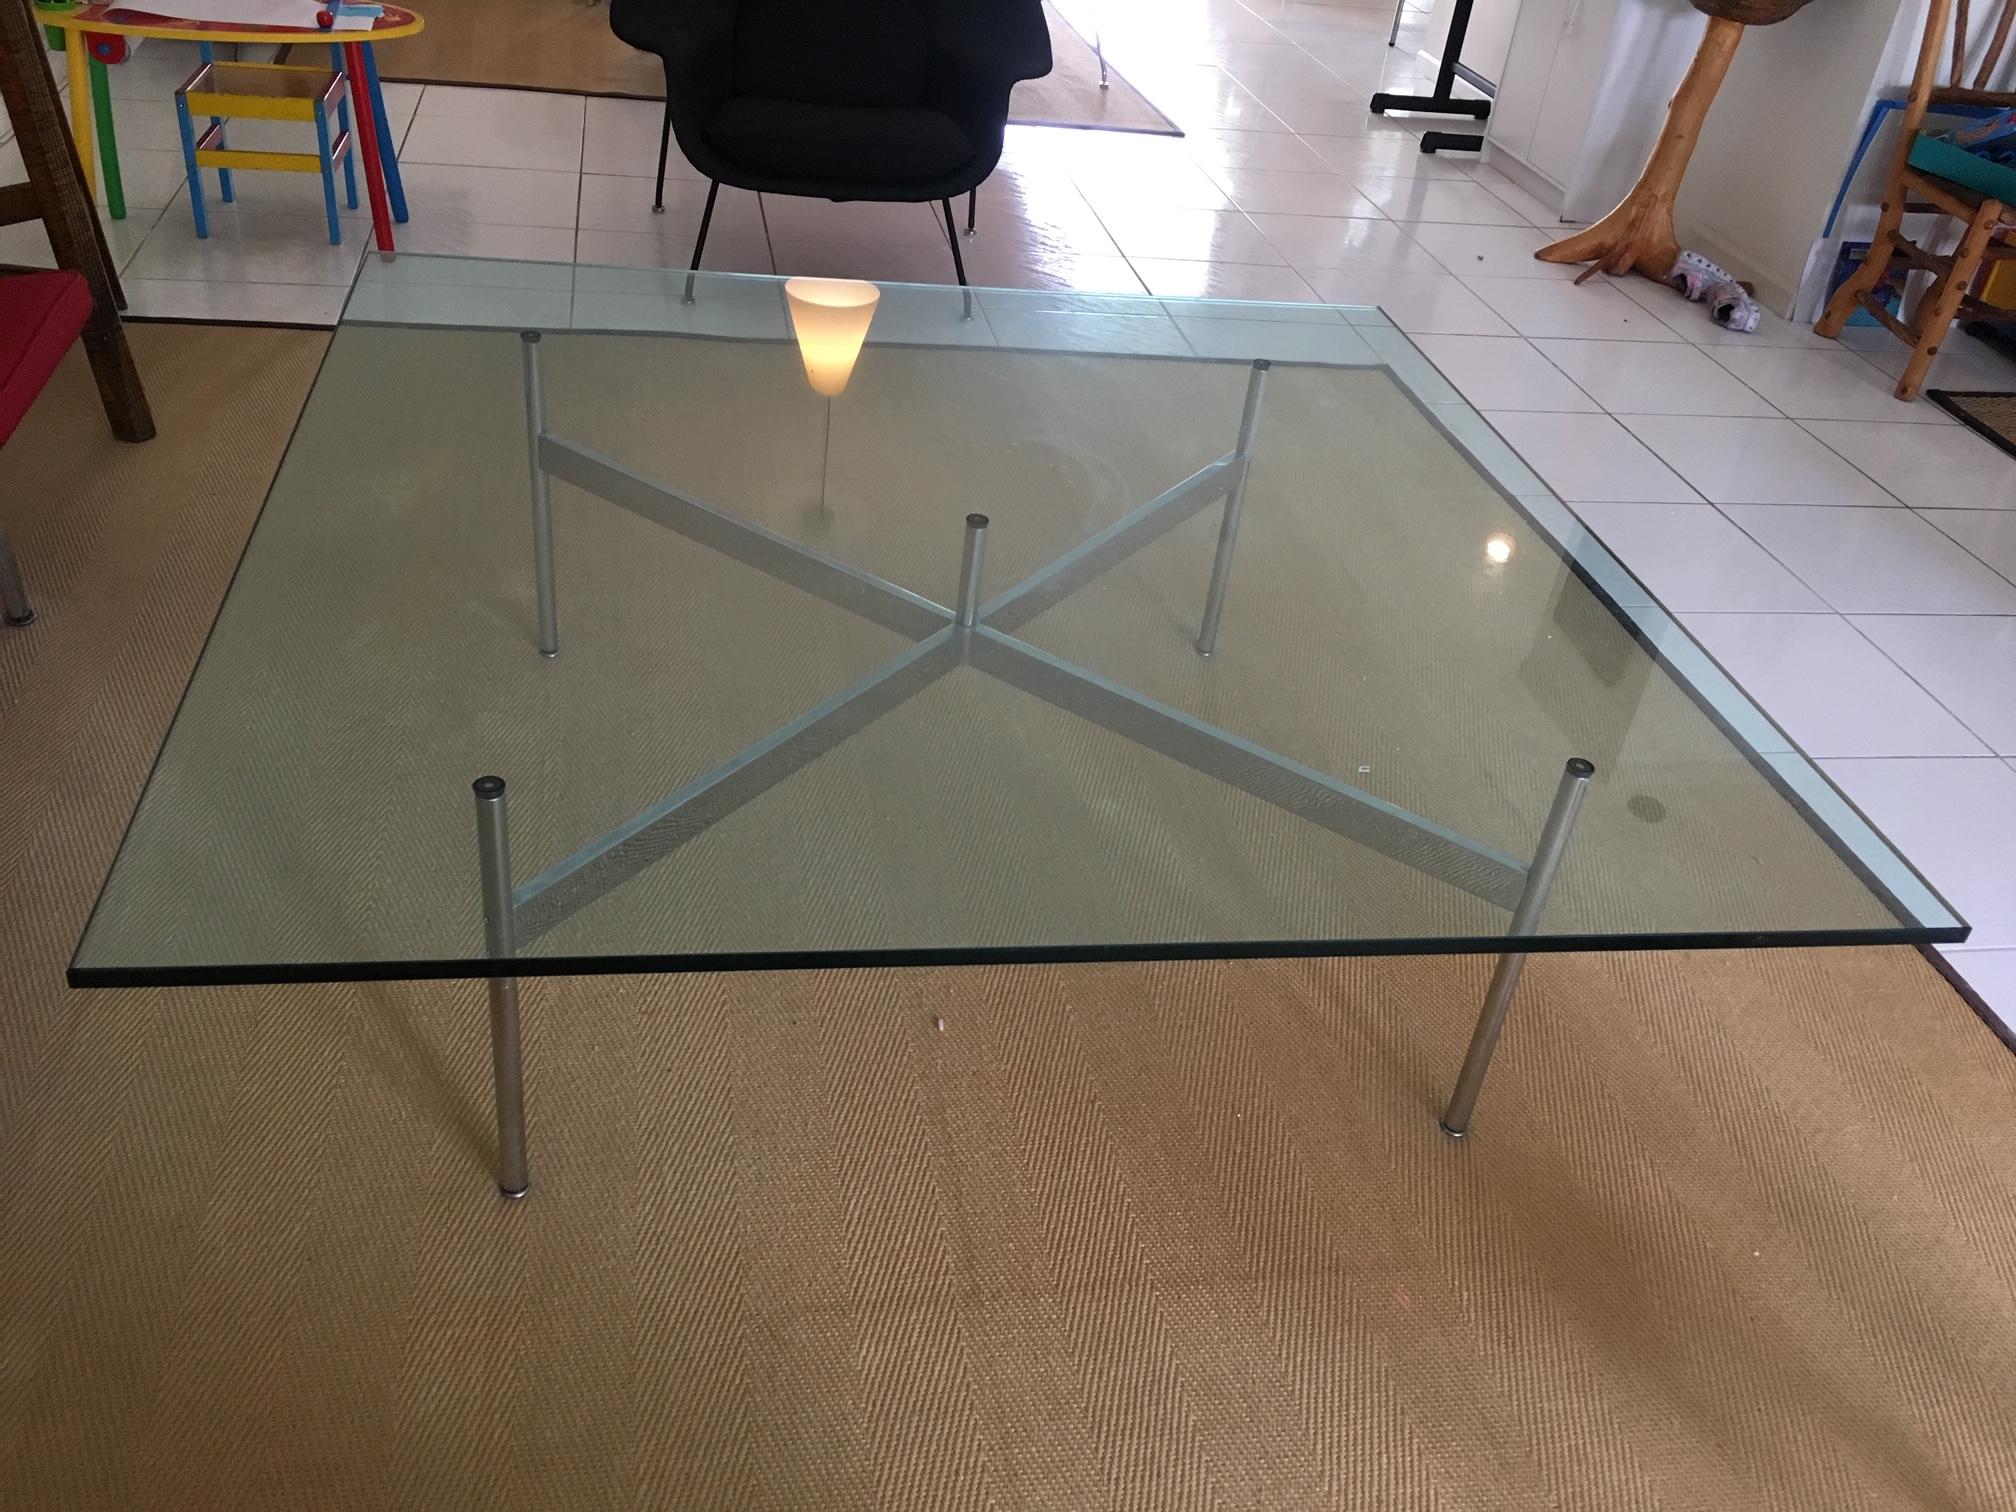 Designed by Katavolos, Littell and Kelley.
Similar to the 24-G coffee table (as shown in the 1960 catalog)
This table from the Architectural Research Group is a massive 60